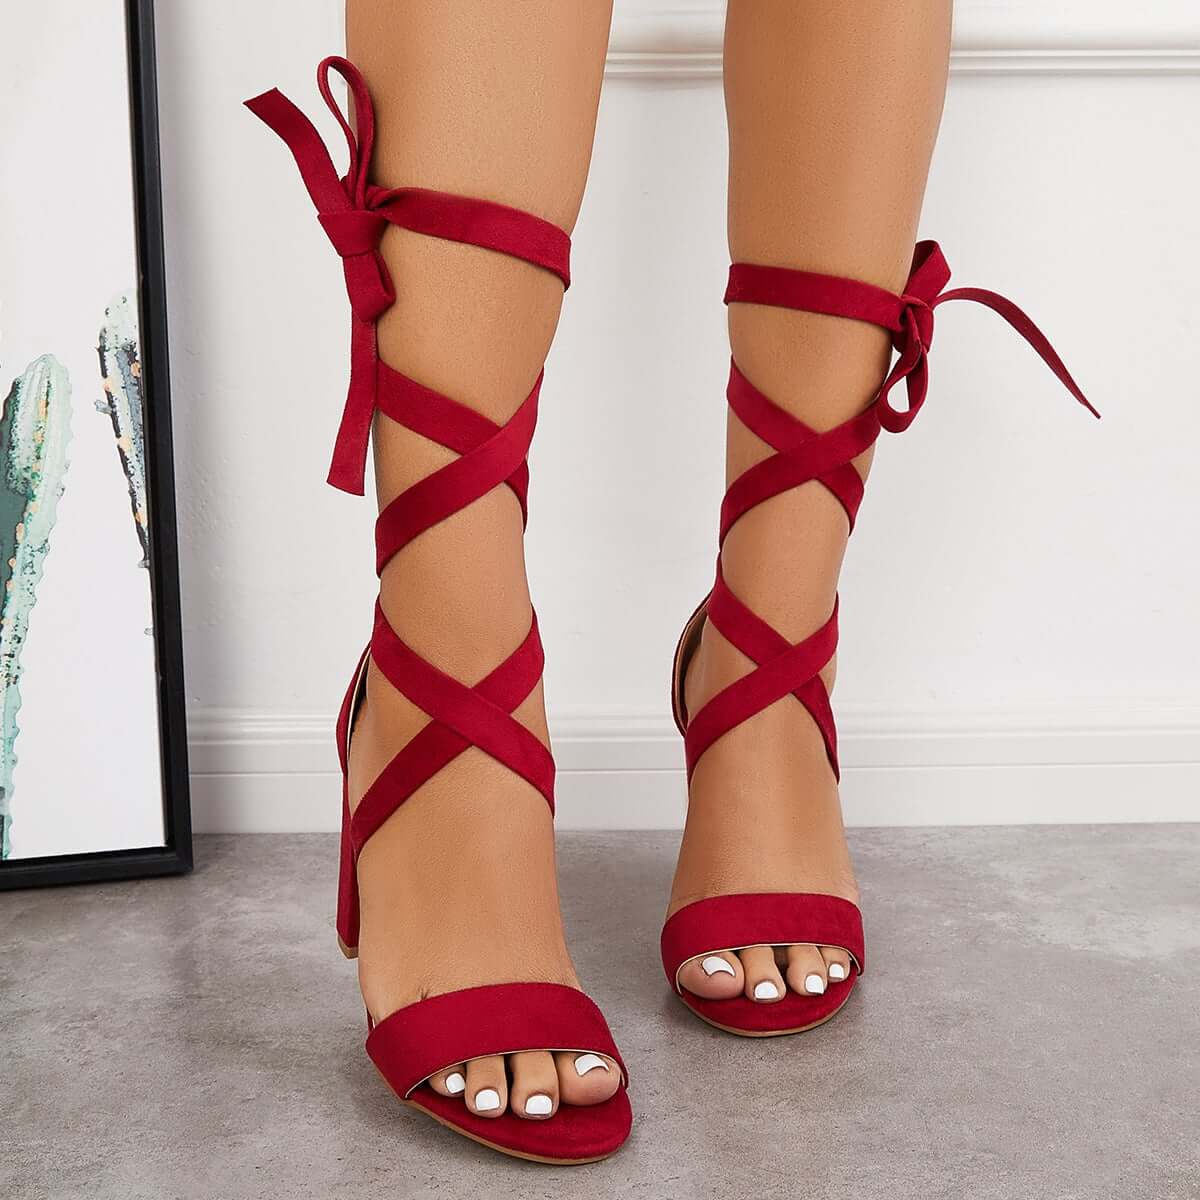 Lace Up High Heeled Sandals Chunky Block Ankle Tie Strap Heels